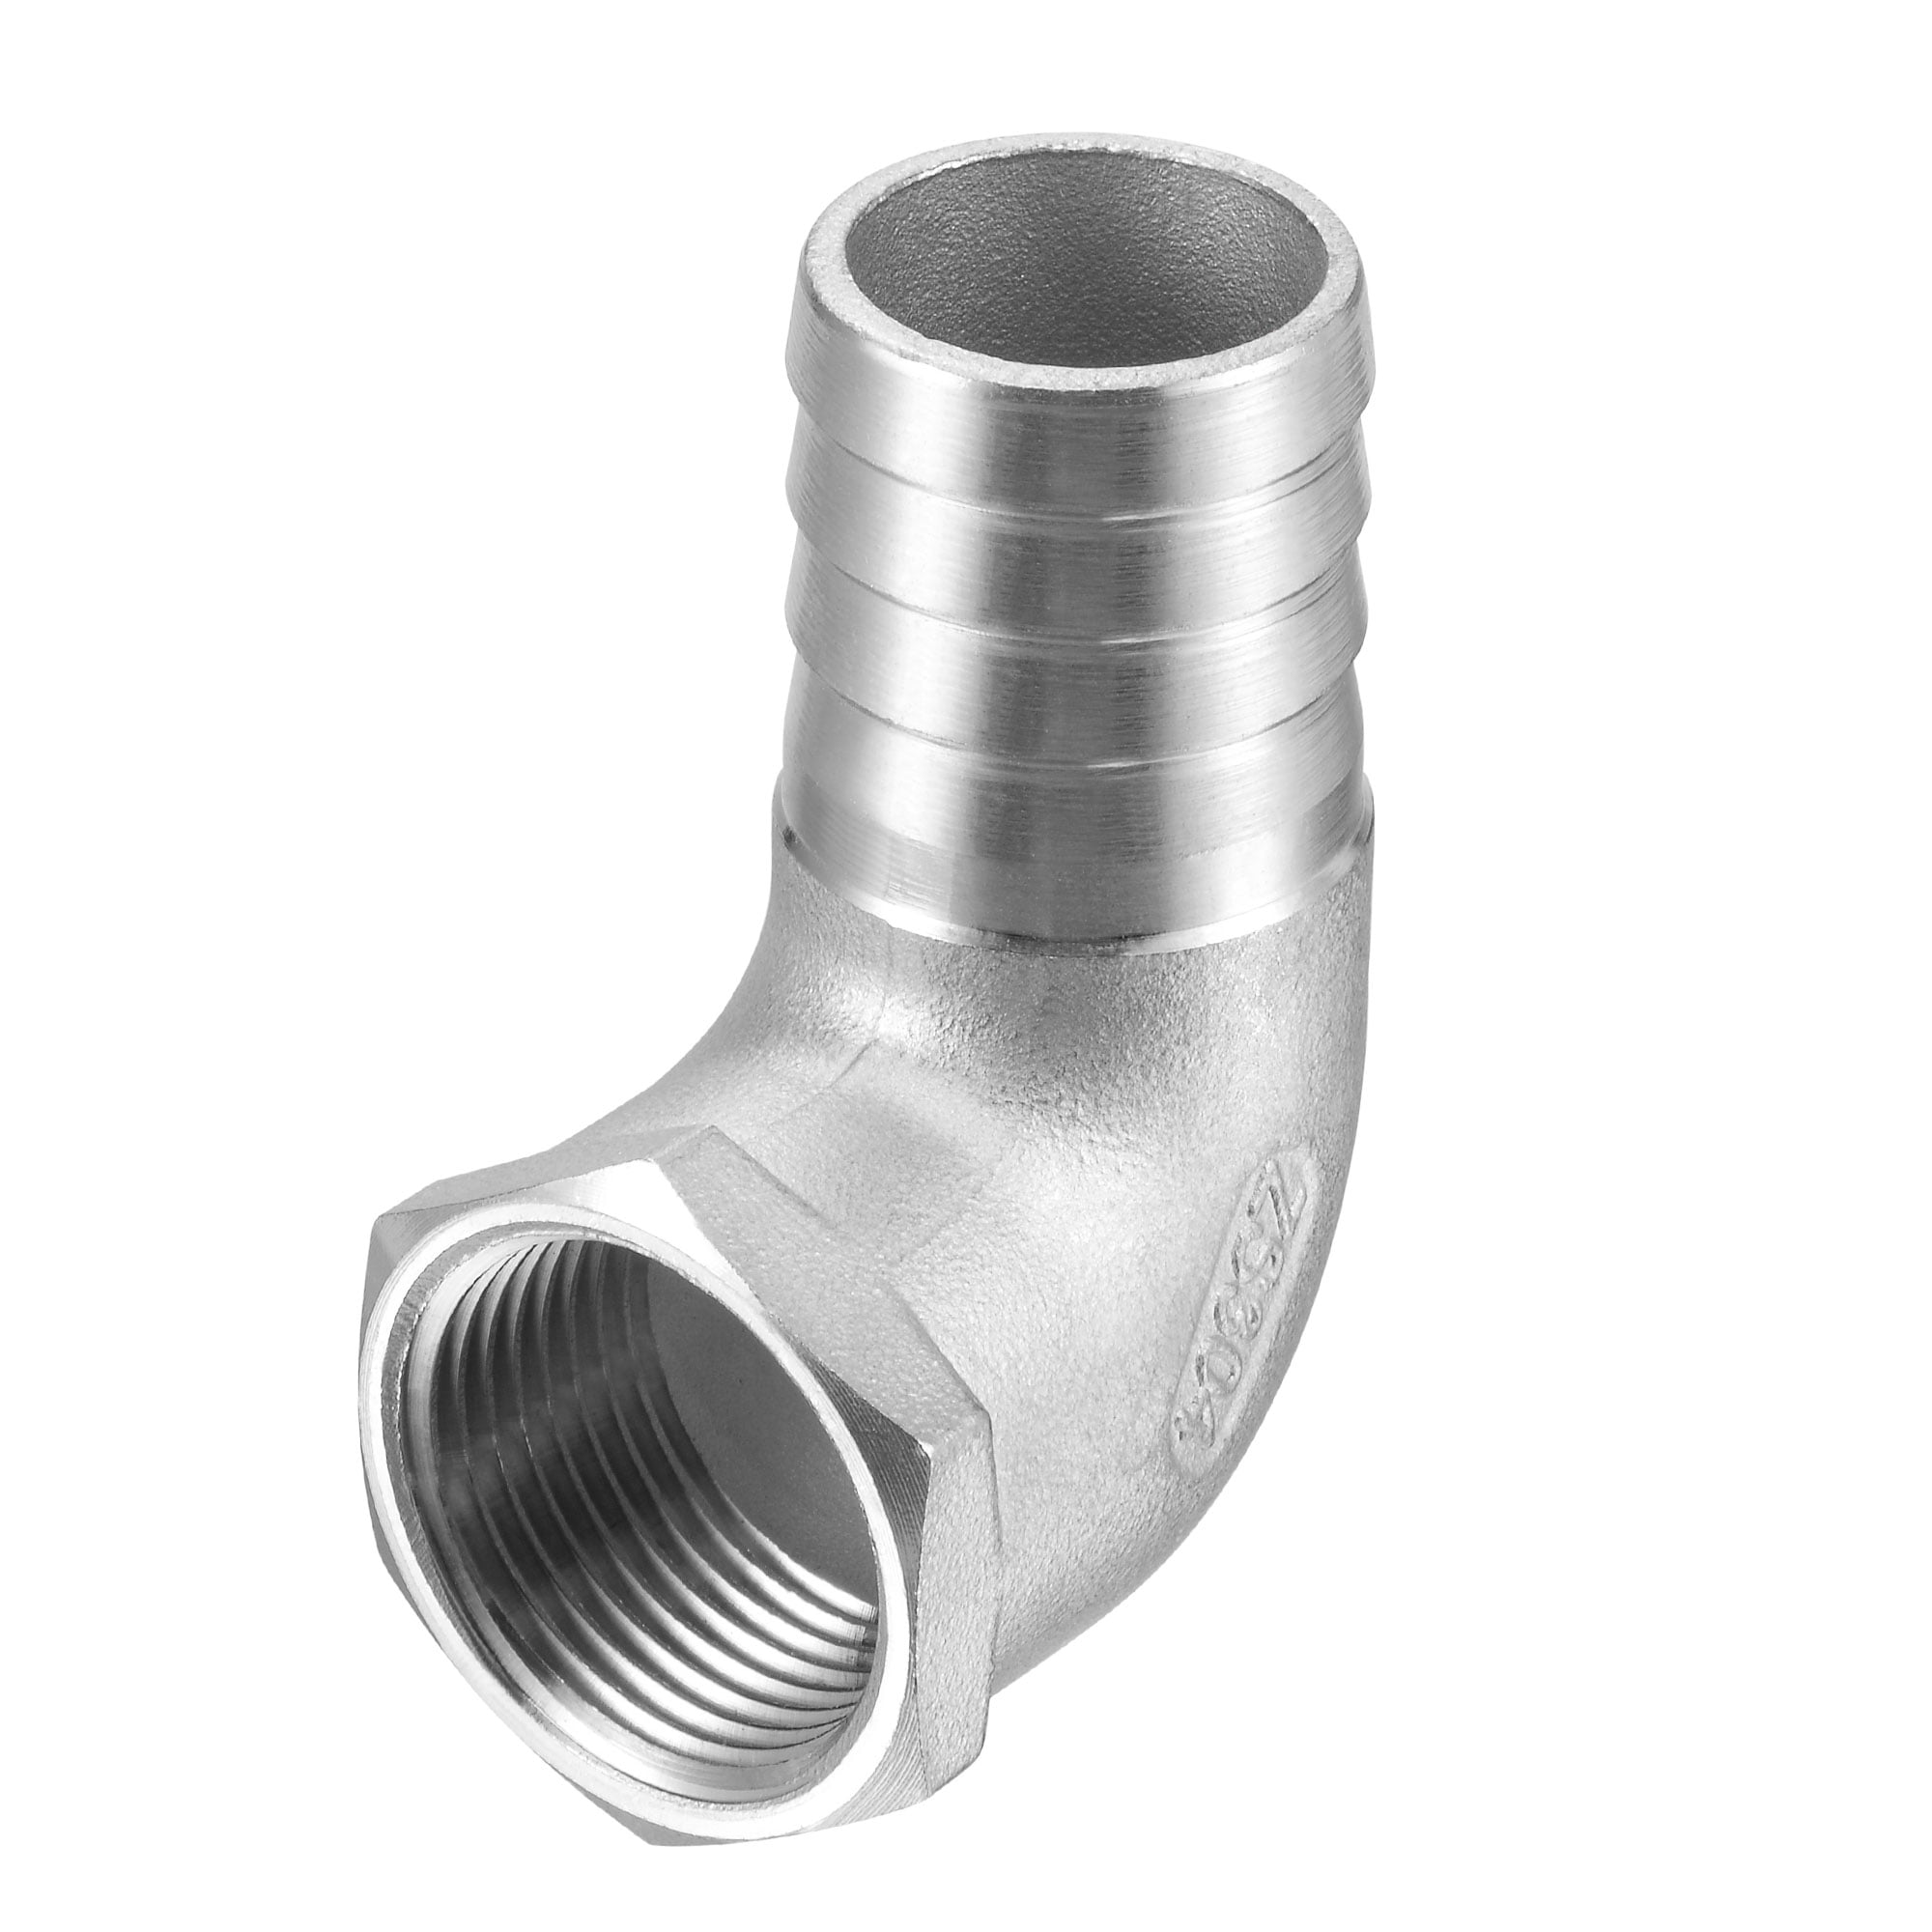 Multiple 304 Stainless Steel Equal Barb Hose Tail Connector Pipe Fitting 